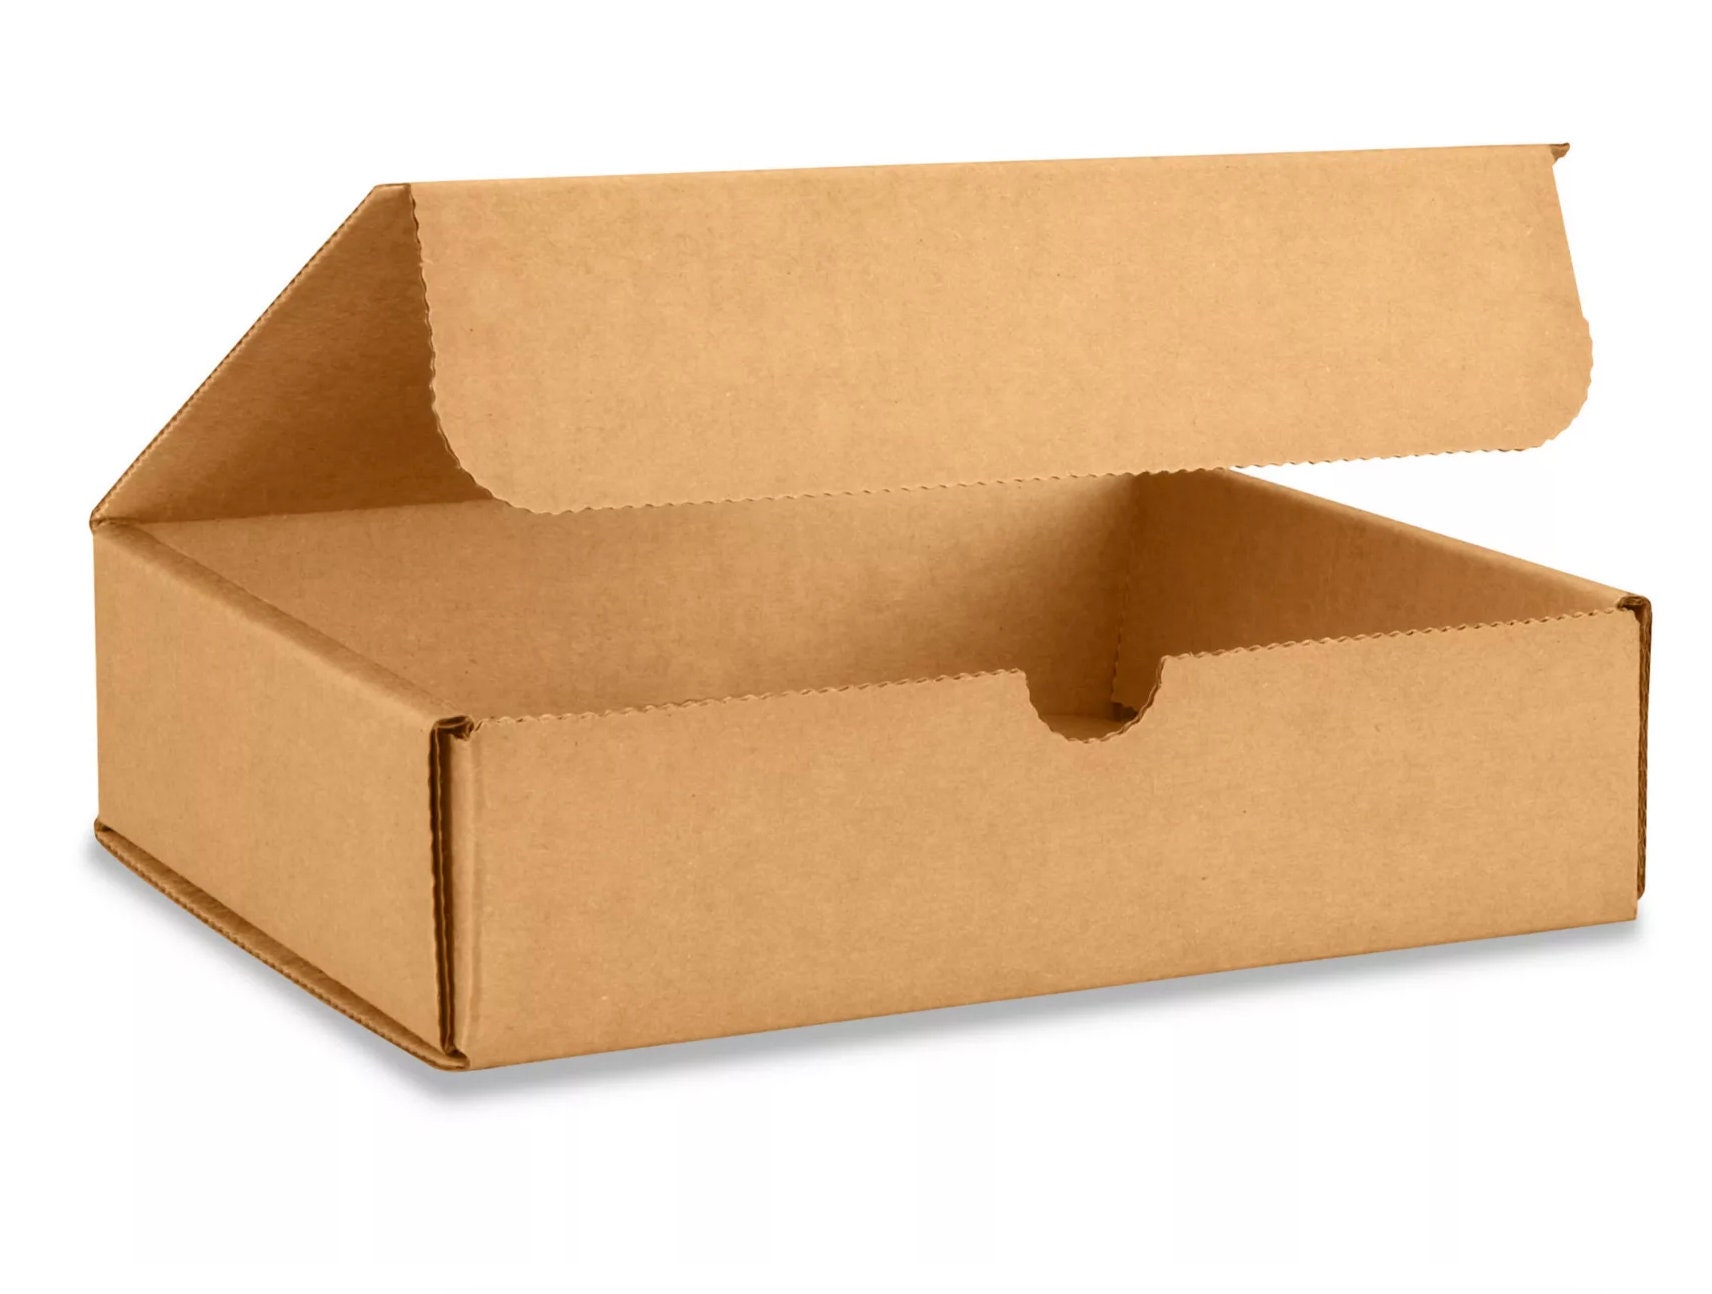 8 X 8 X 2.3 Cardboard Boxes With Lids Square Box Gift Boxes Medium Size  Corrugated Box Packaging Supplies Carton Paper Boxes Gift Wrapping 